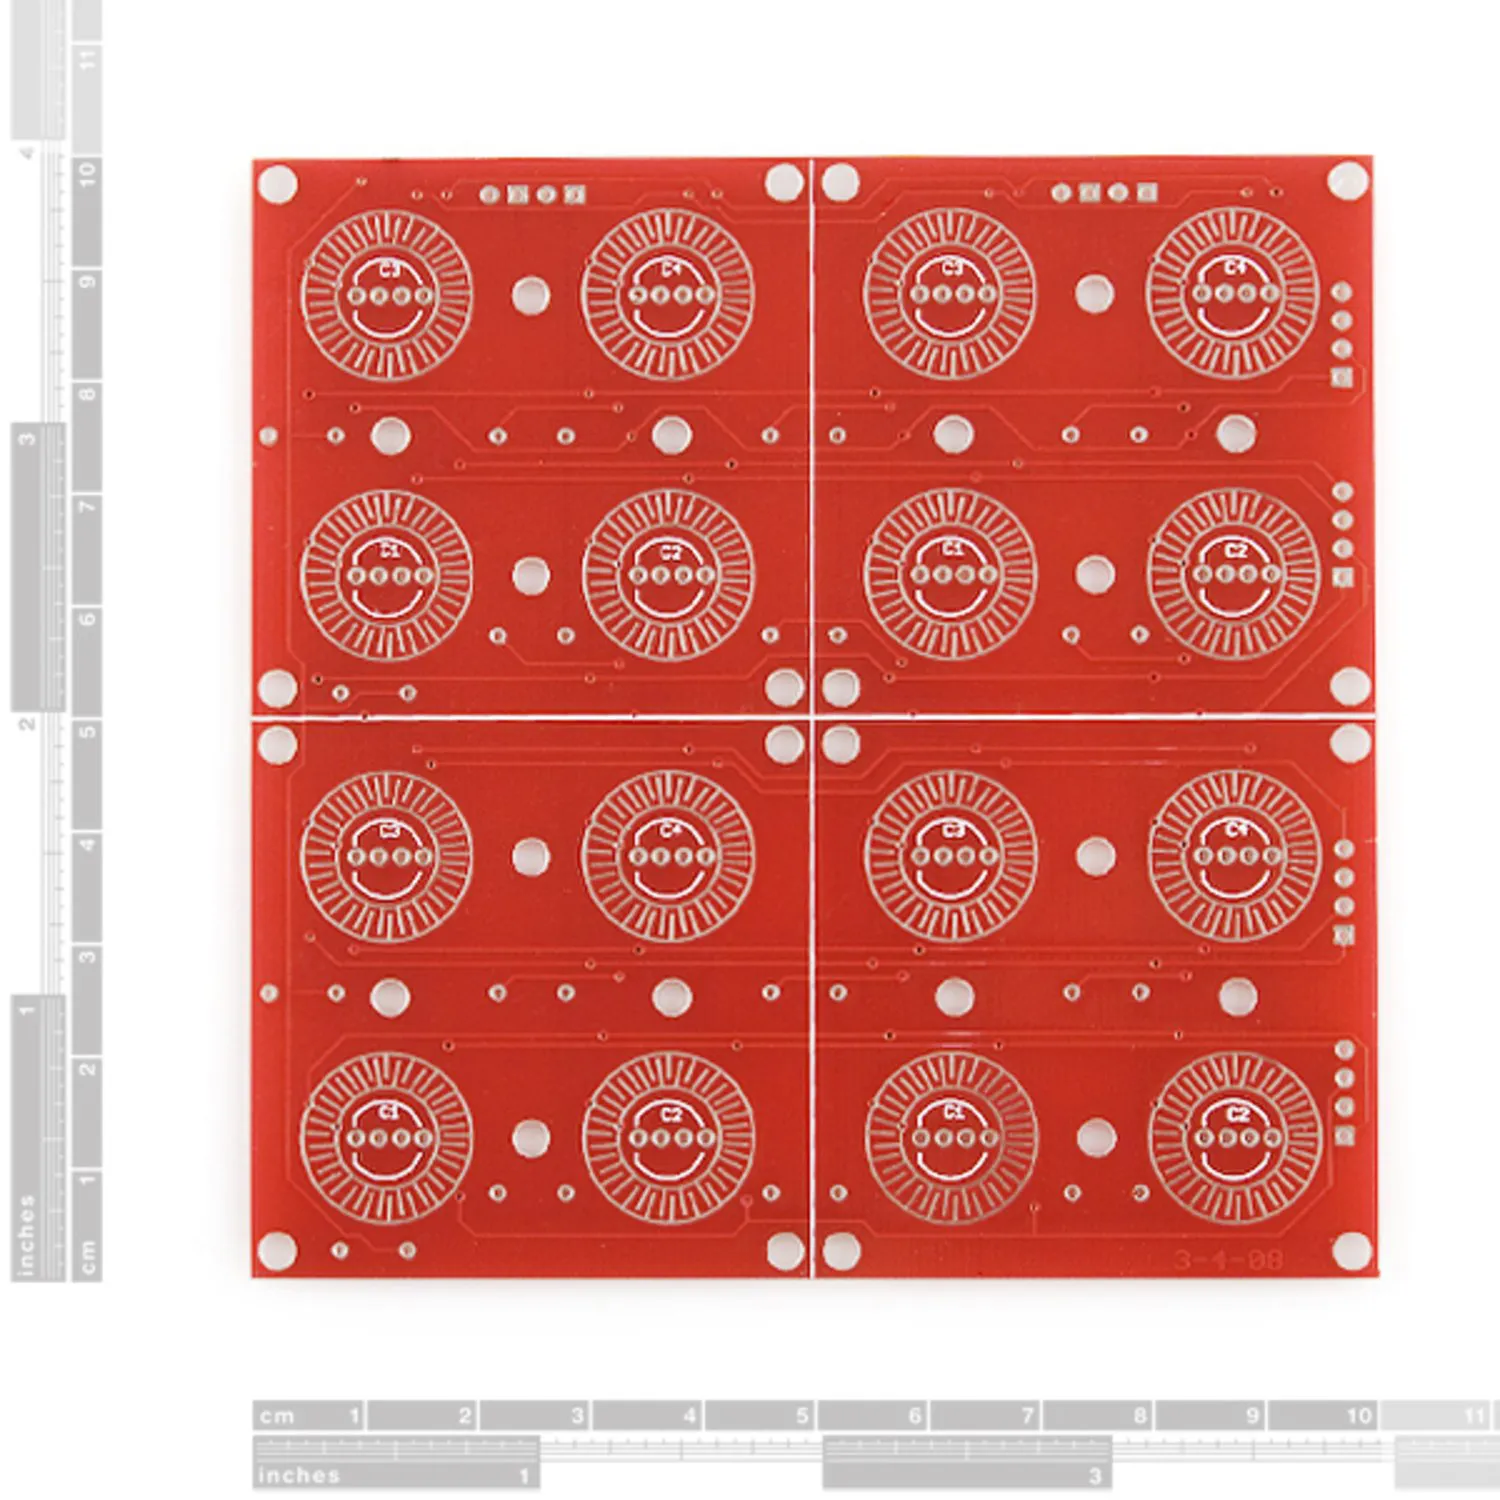 Photo of Button Pad 4x4 - Breakout PCB